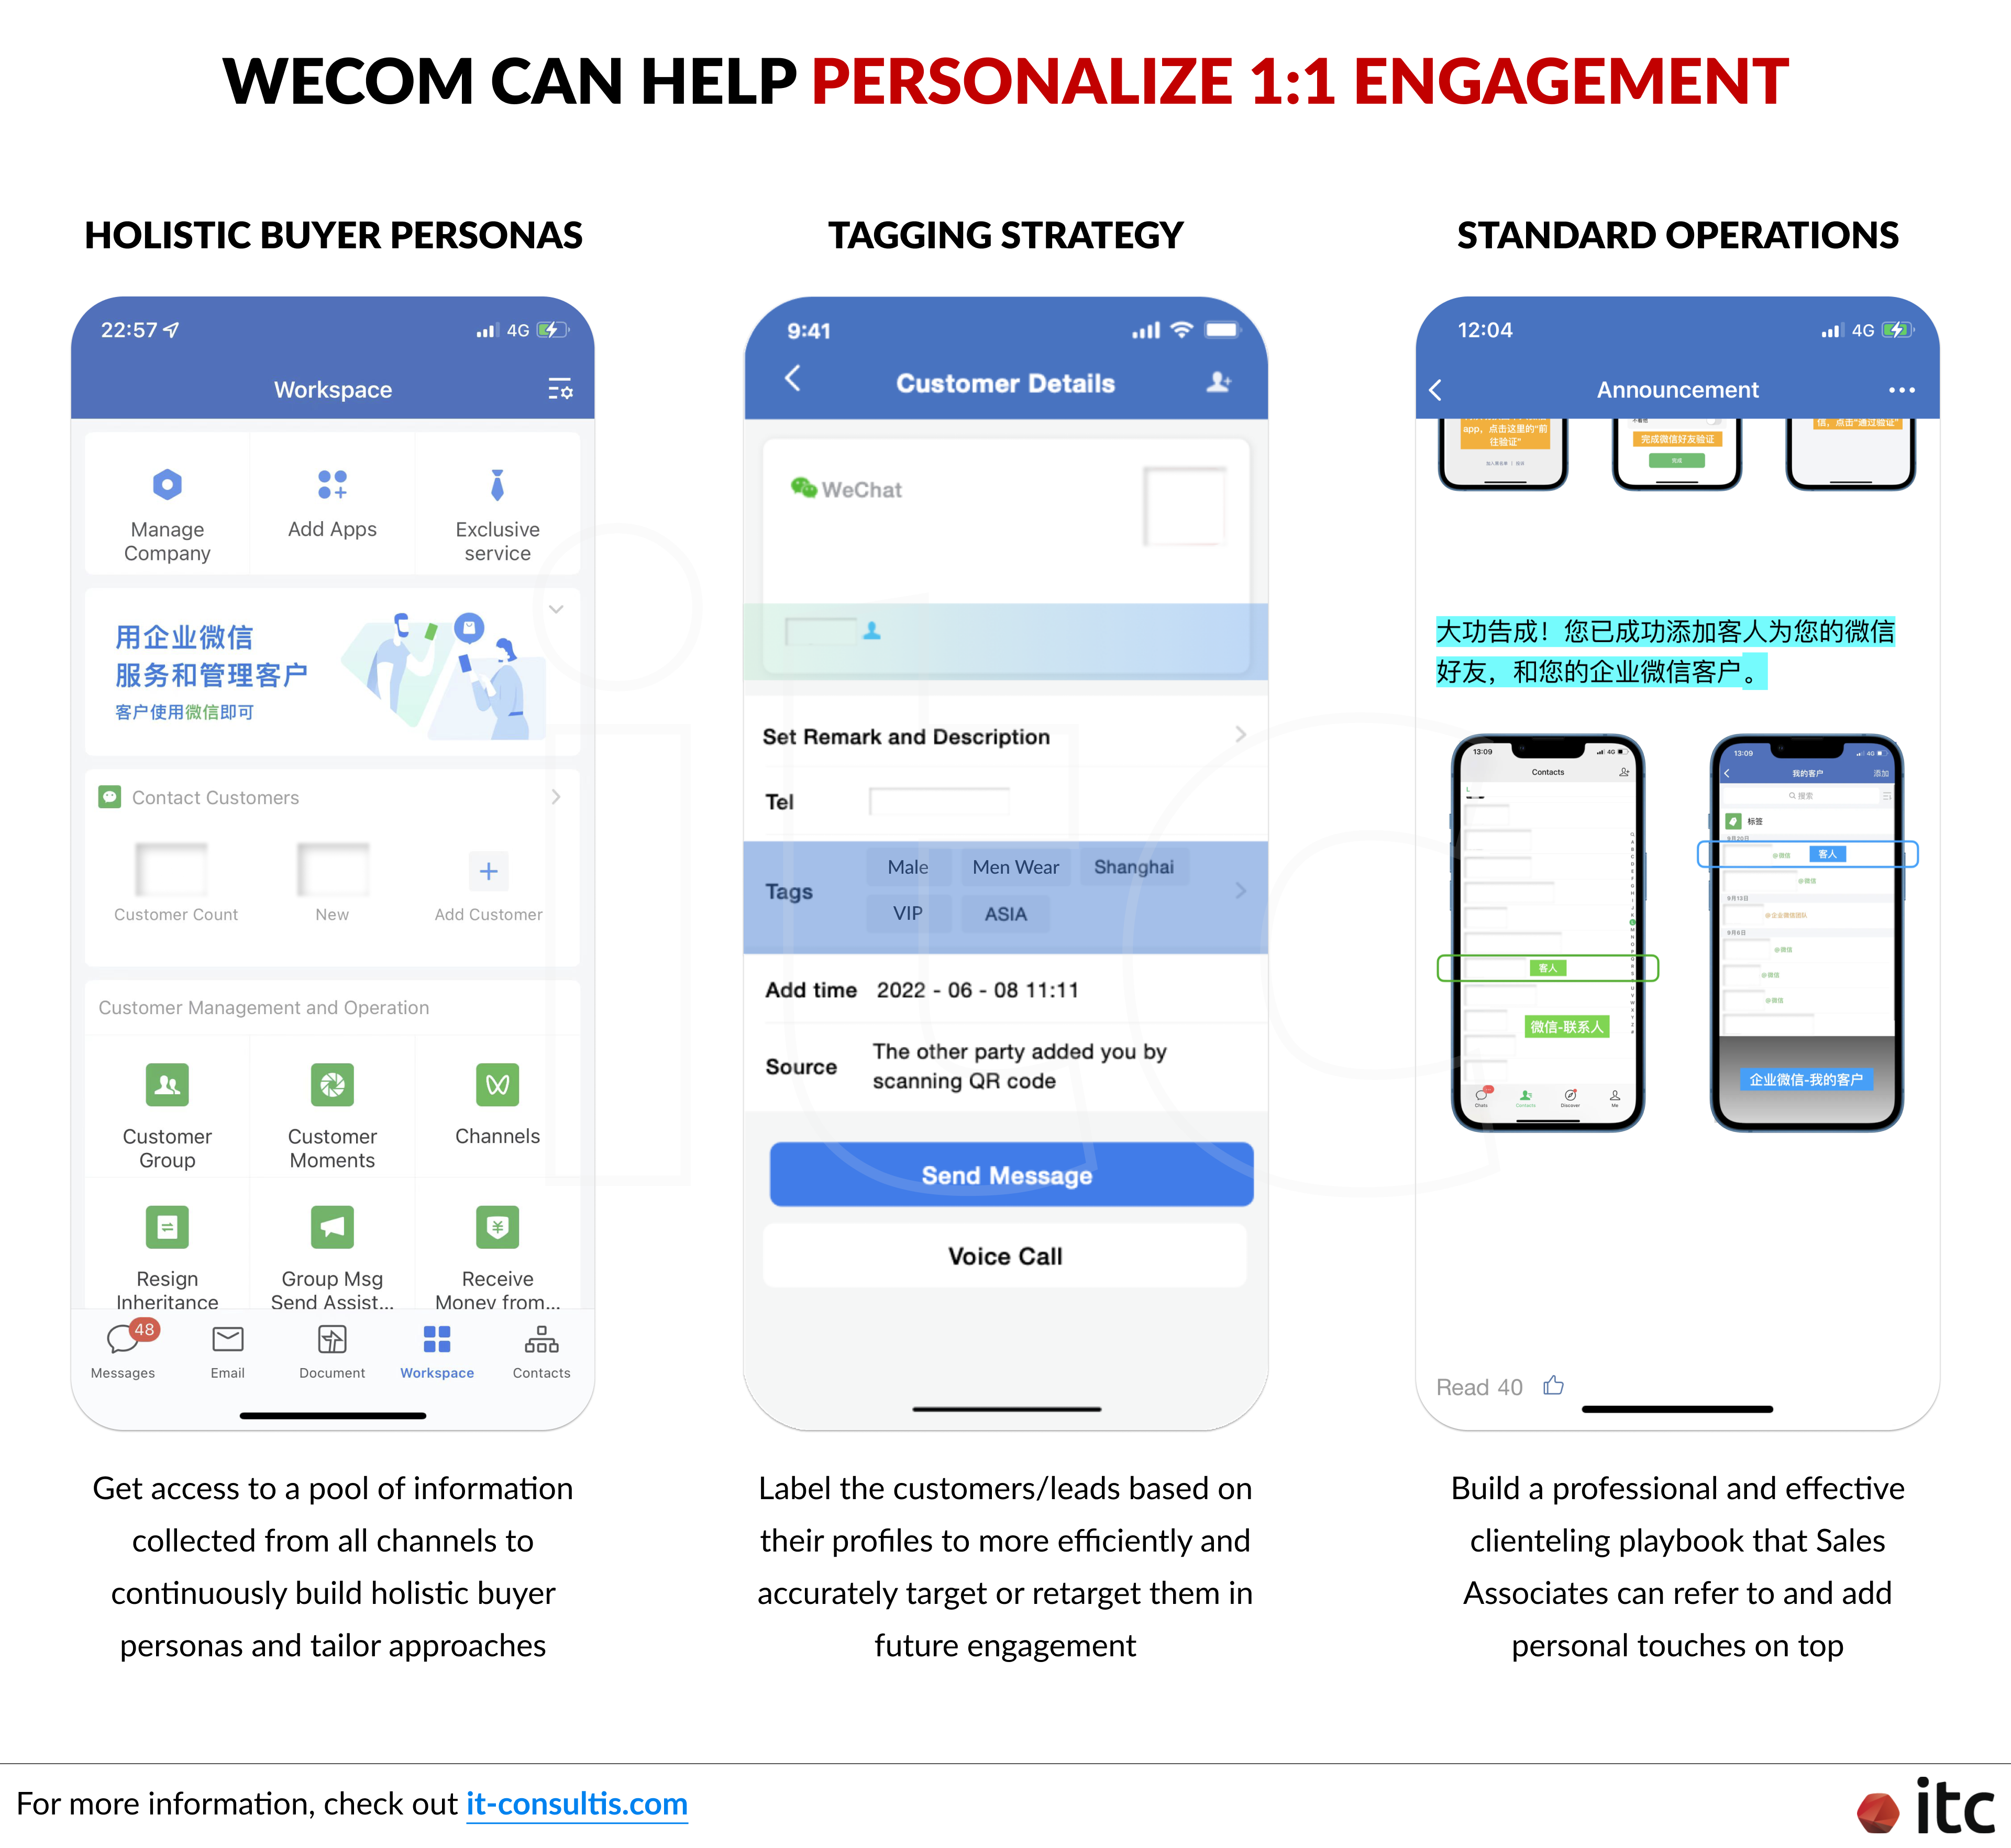 WeCom can help personalize 1:1 engagement by building and leveraging holistic buyer personas, employing tagging strategy to improve targeting accuracy, and establishing standard operations to boost clienteling effectiveness